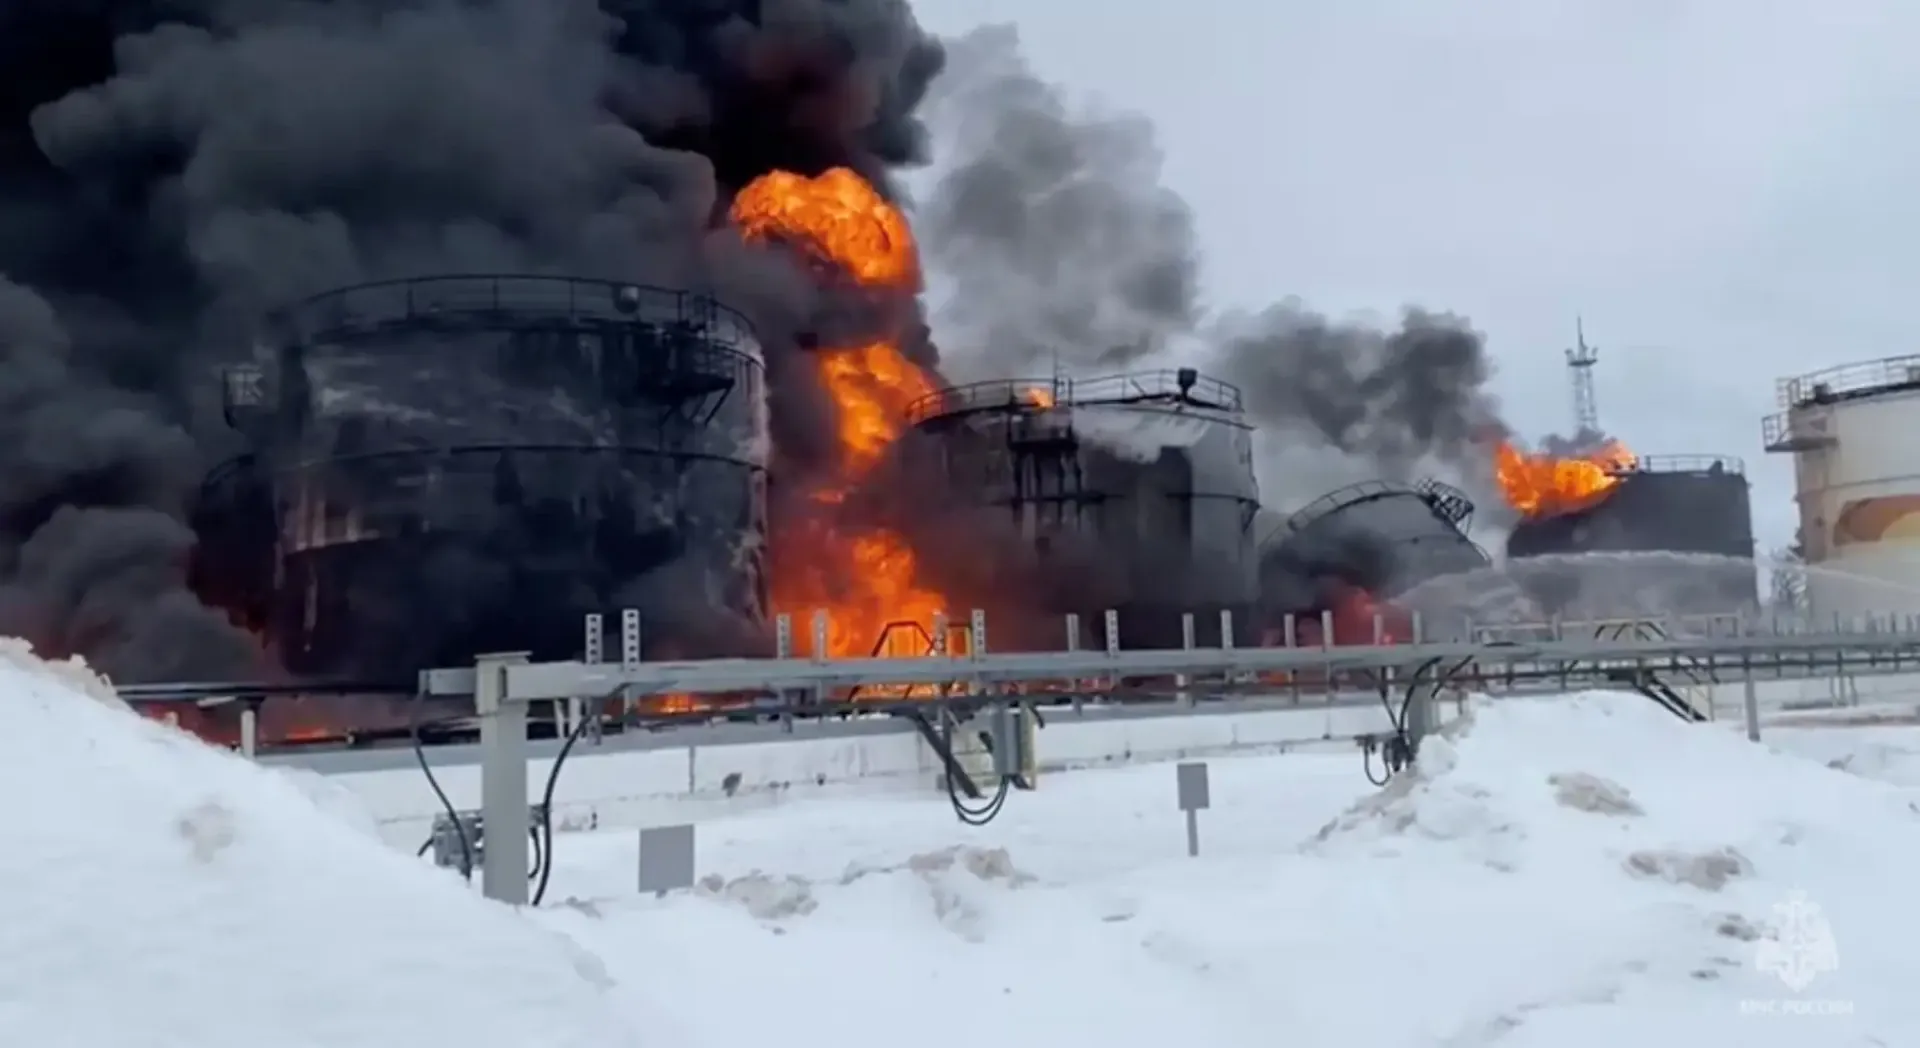 Ukraine Is Actively Targeting Russian Oil Refineries. Why is This Important?